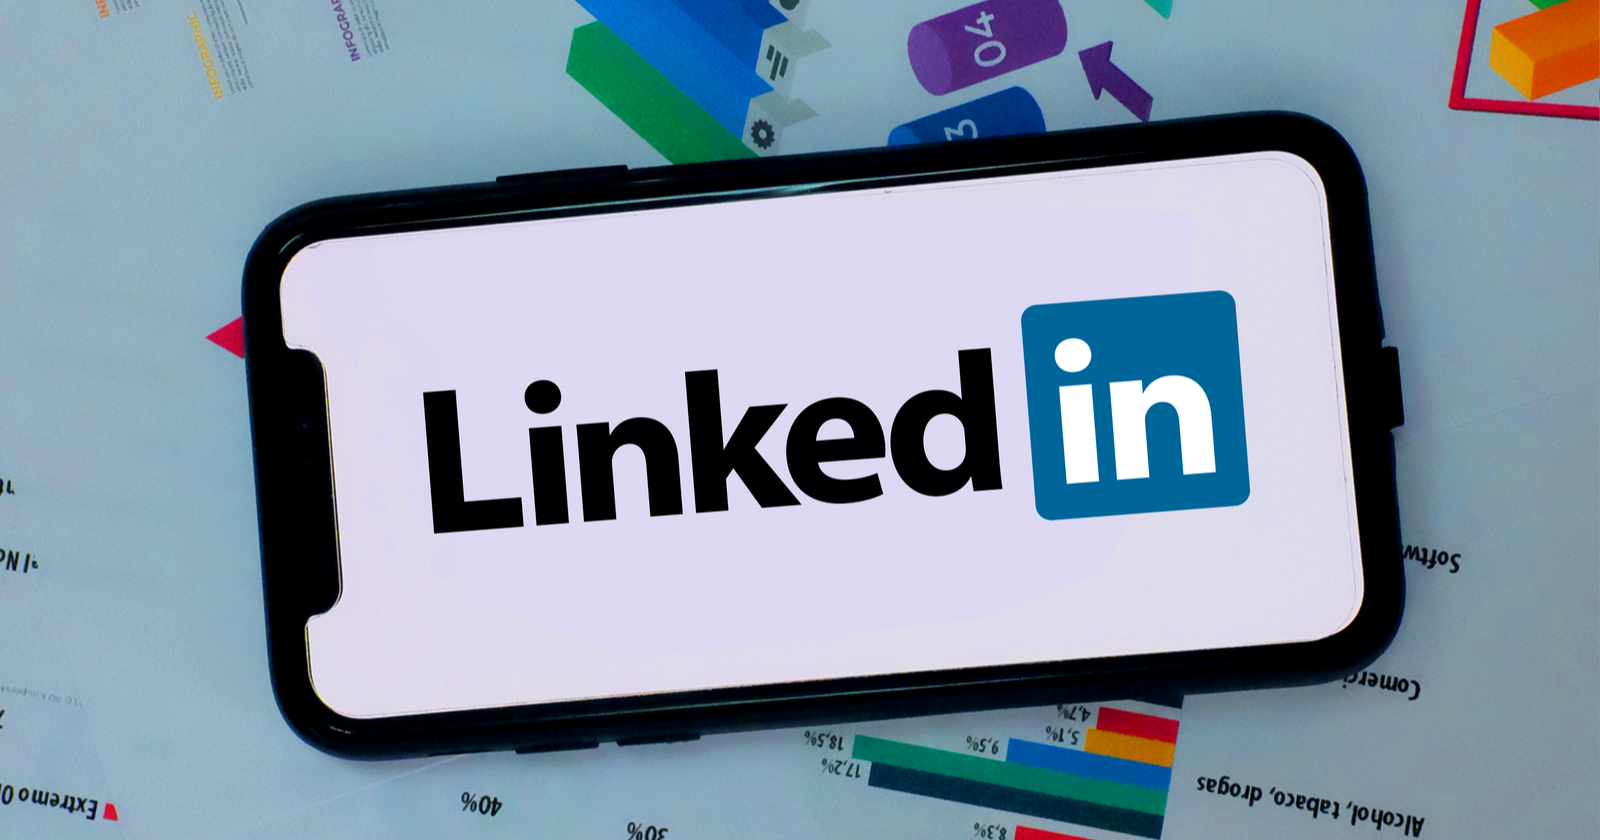 17 Latest LinkedIn Statistics, Facts, And Trends For 2022